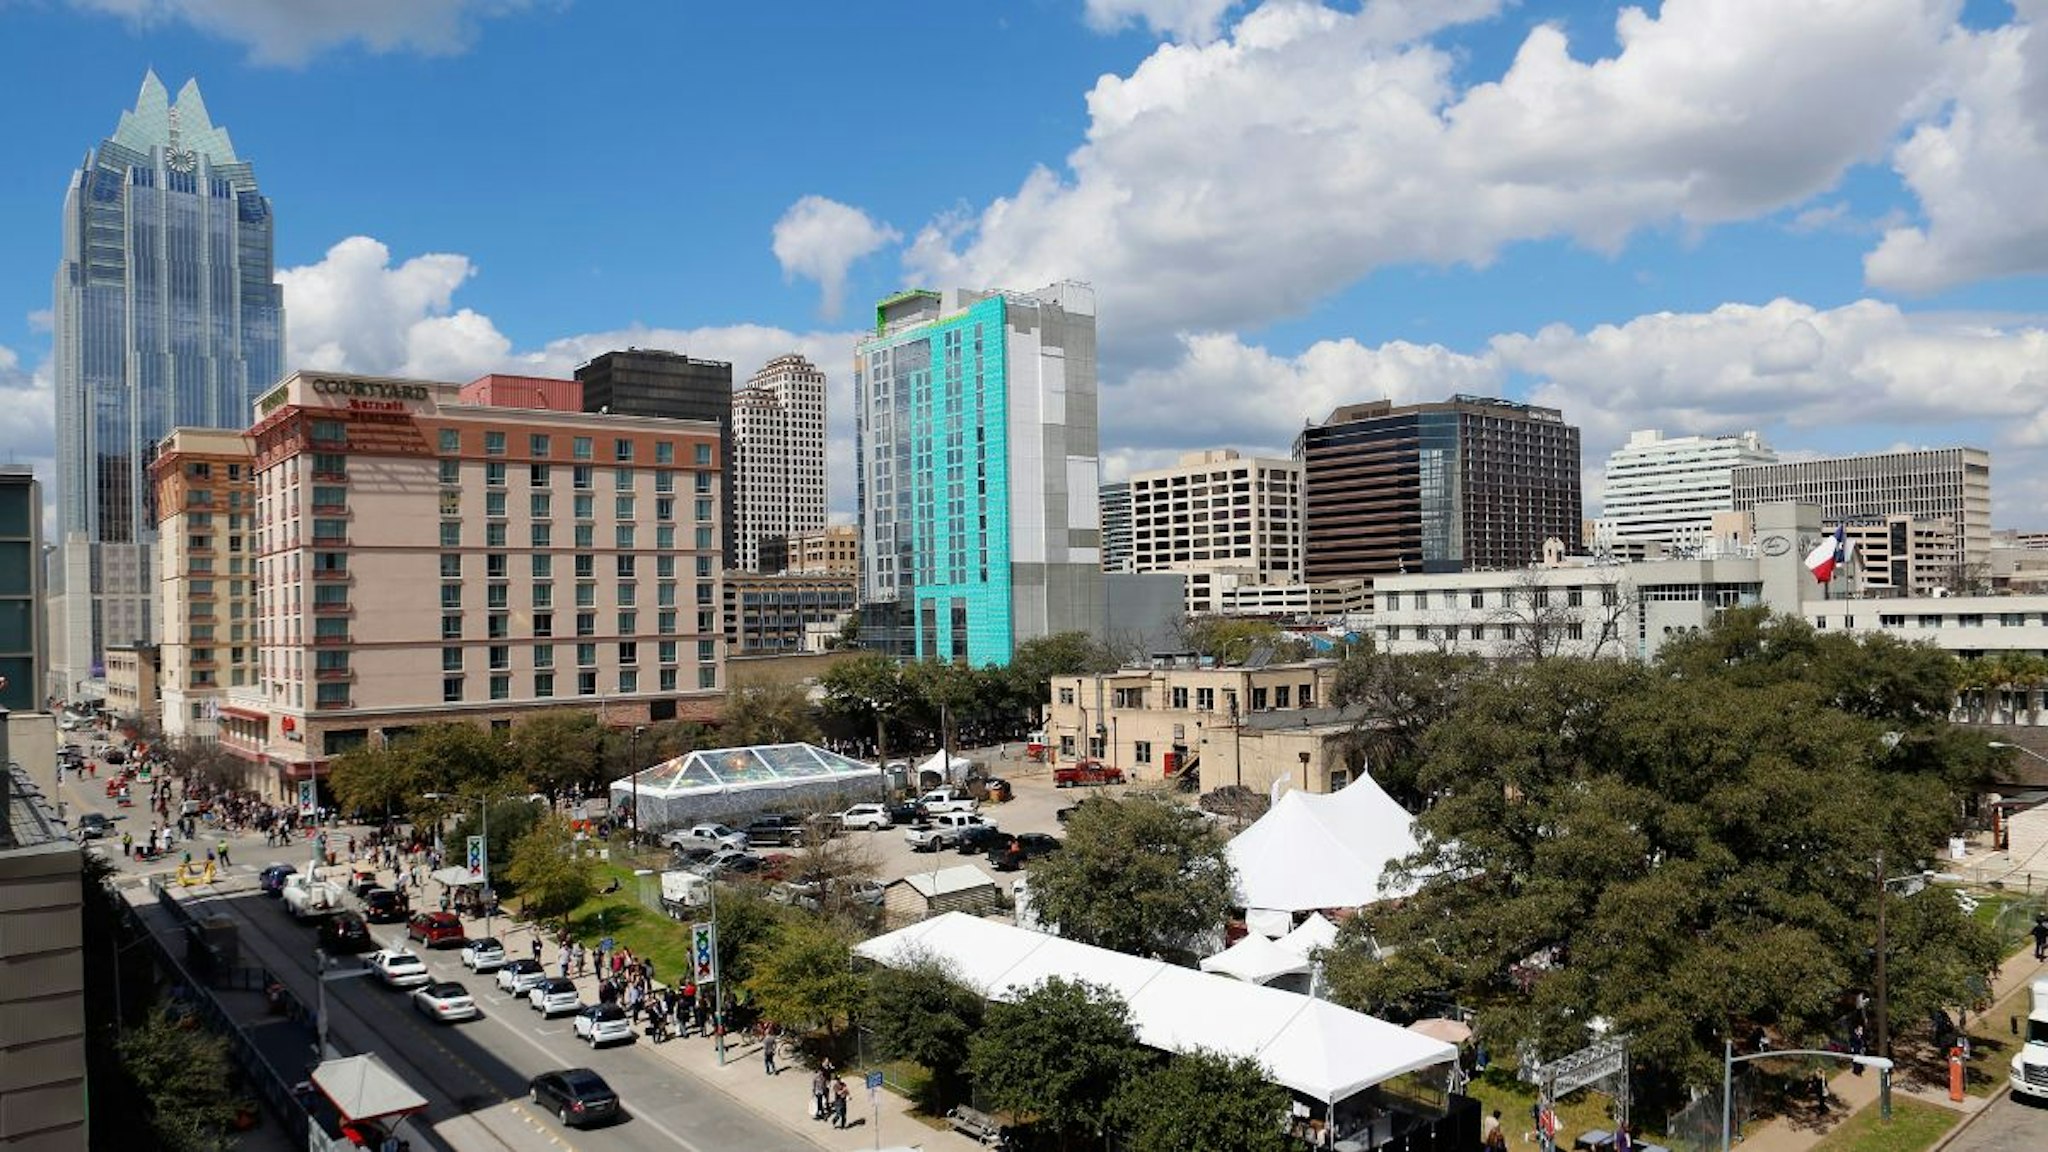 A view of the Austin city skyline during the 2015 SXSW Music, Film + Interactive Festival on March 13, 2015 in Austin, Texas.